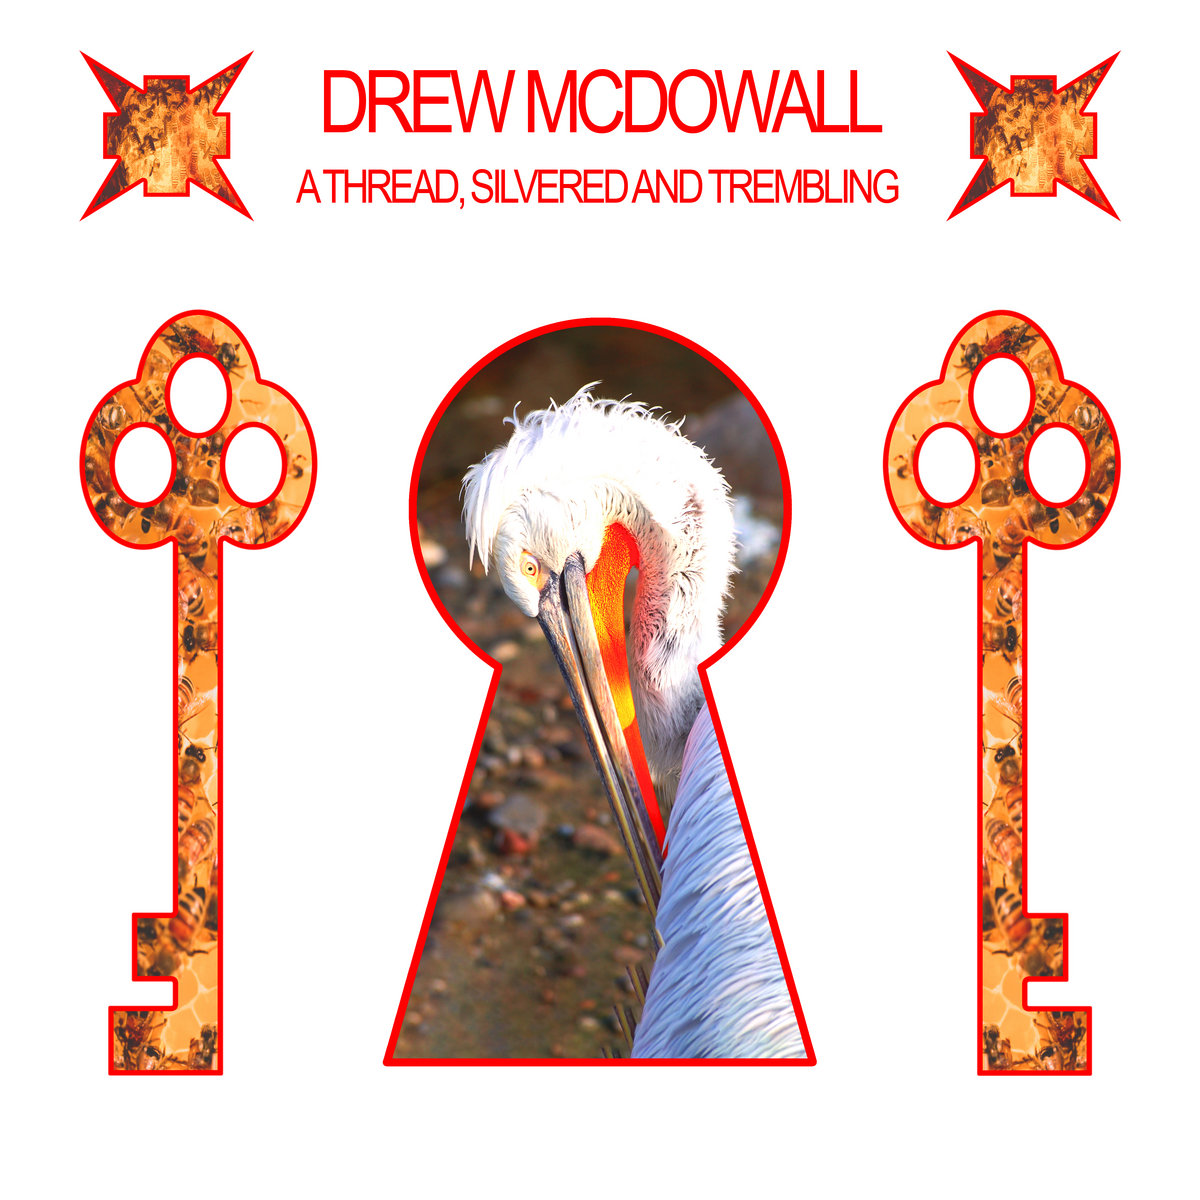 Drew McDowall, “A Thread, Silvered and Trembling”